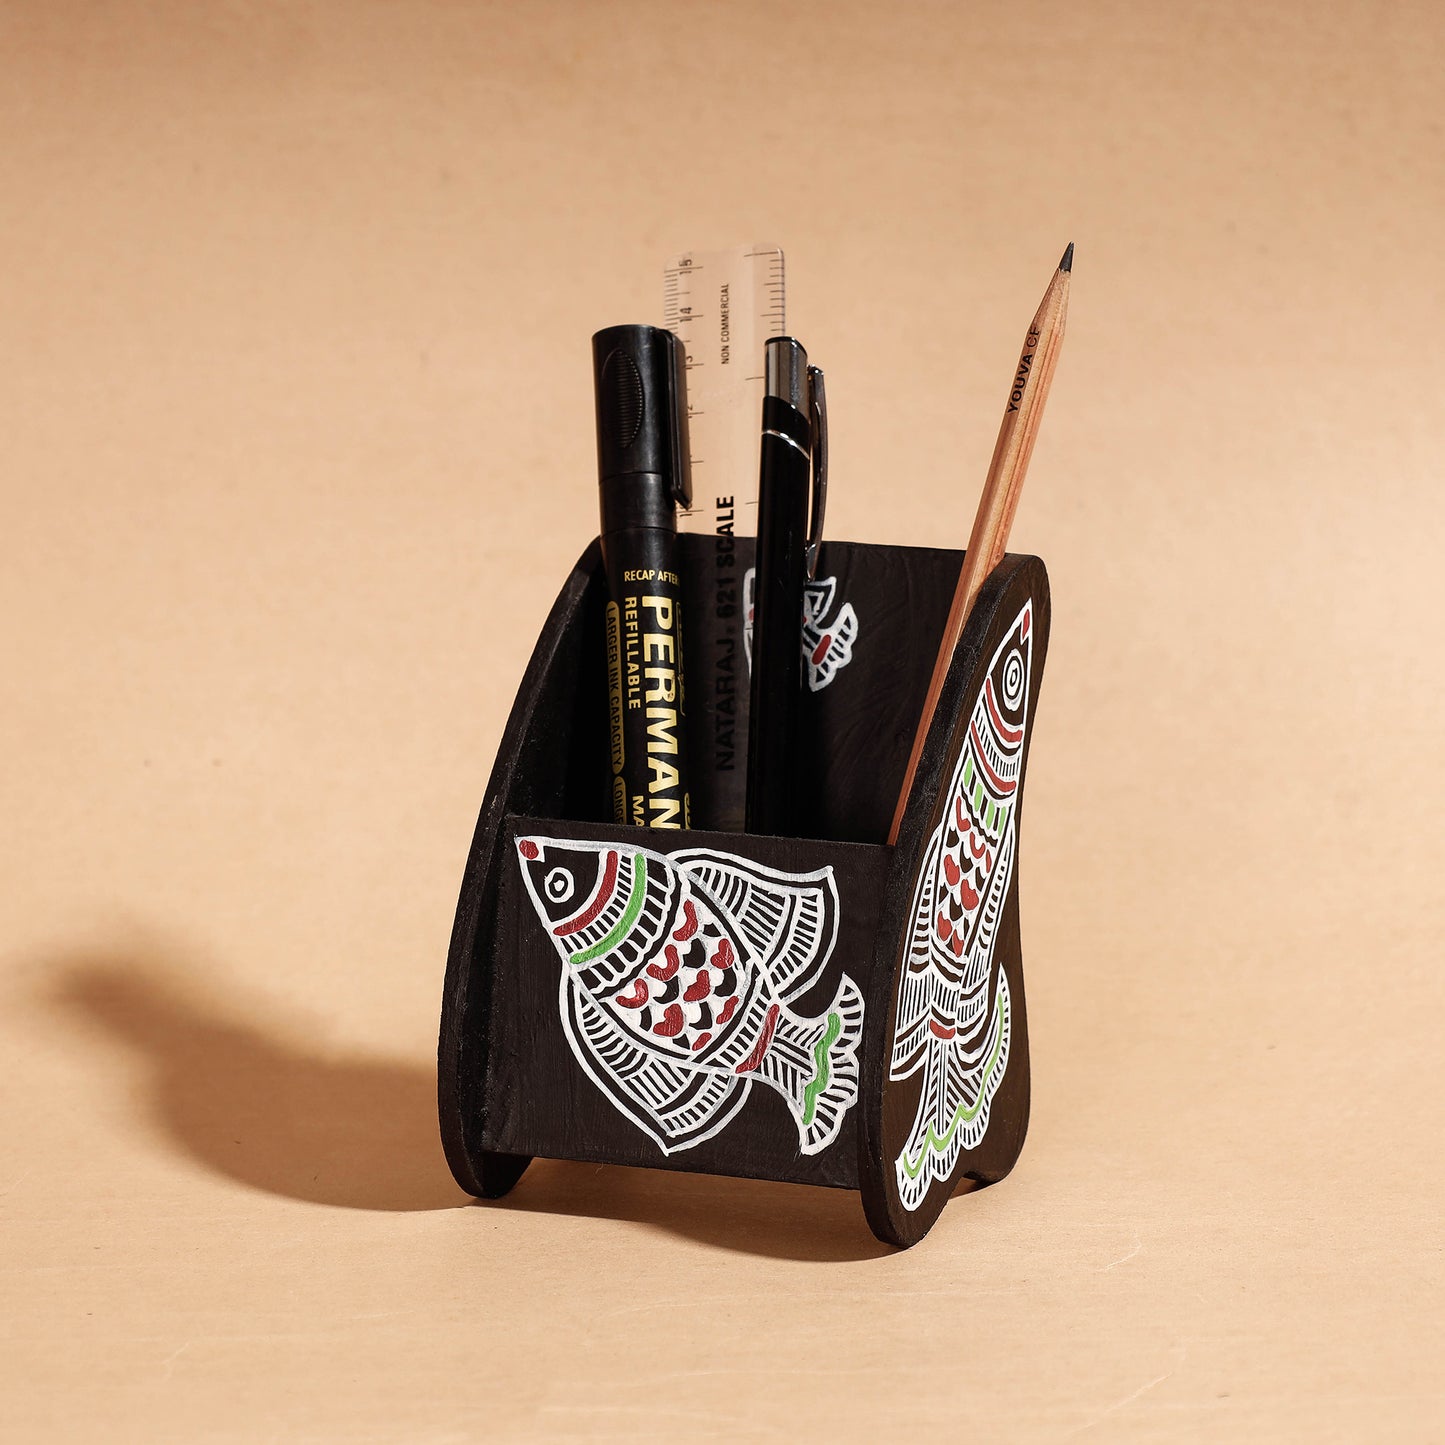 Madhubani Handpainted Wooden Pen Stand (3.5 x 3 in)